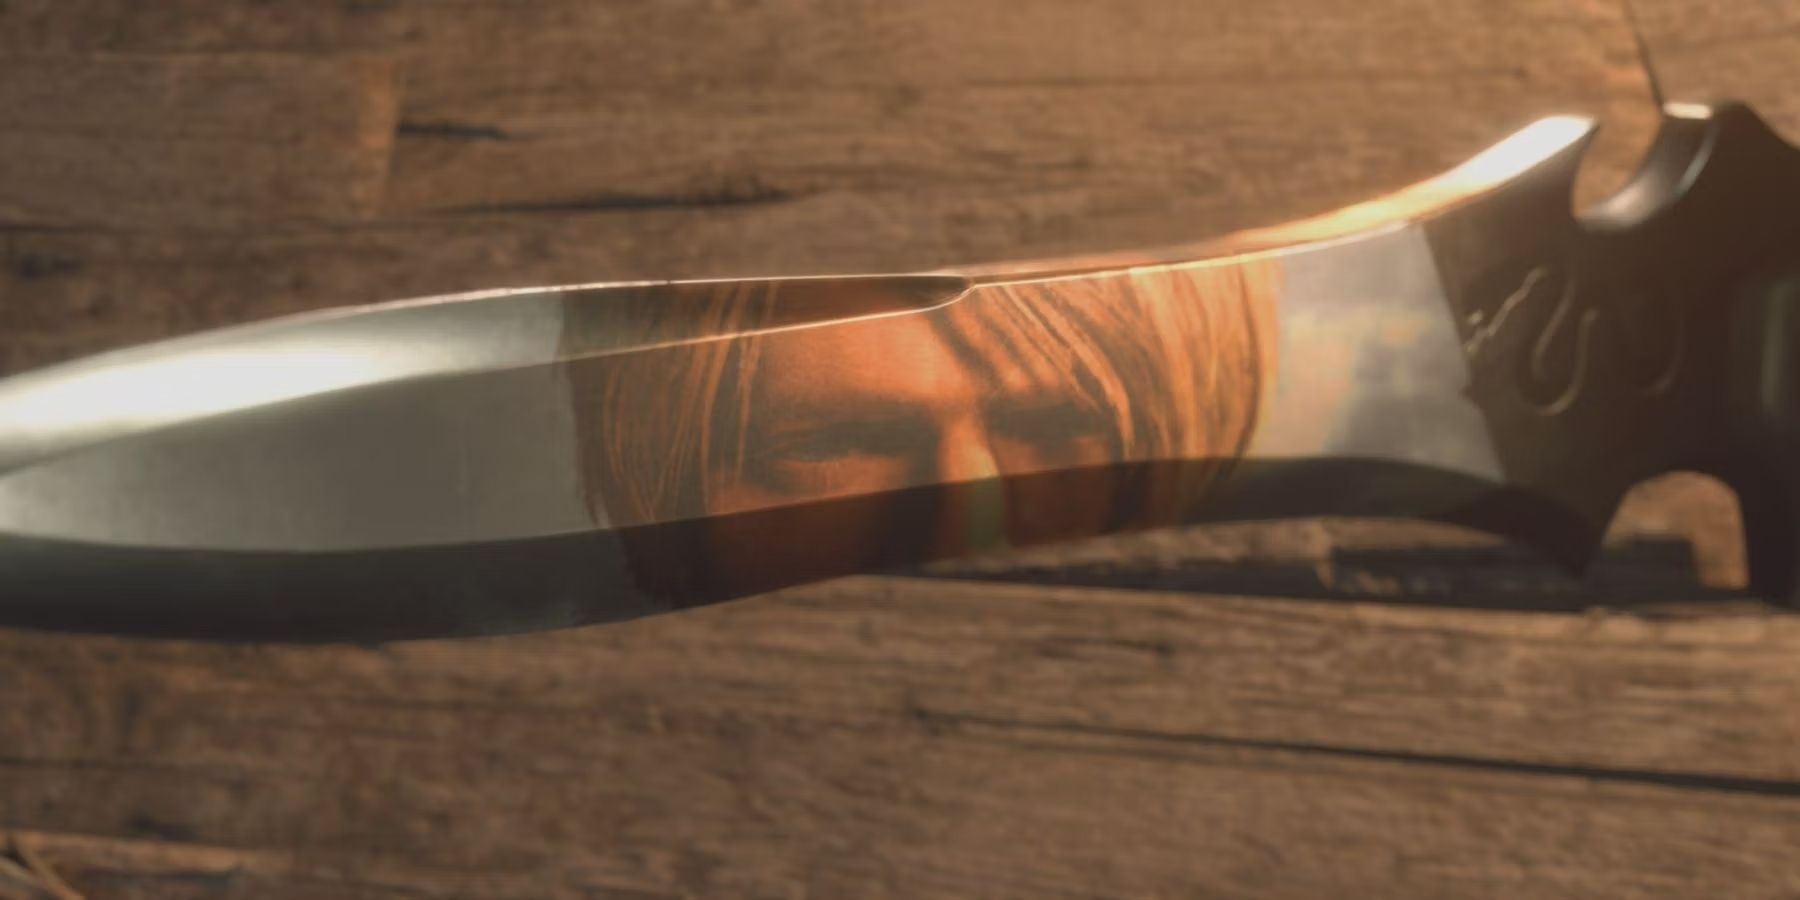 Leon from Resident Evil 4 Remake looks at his reflection in the fighting knife